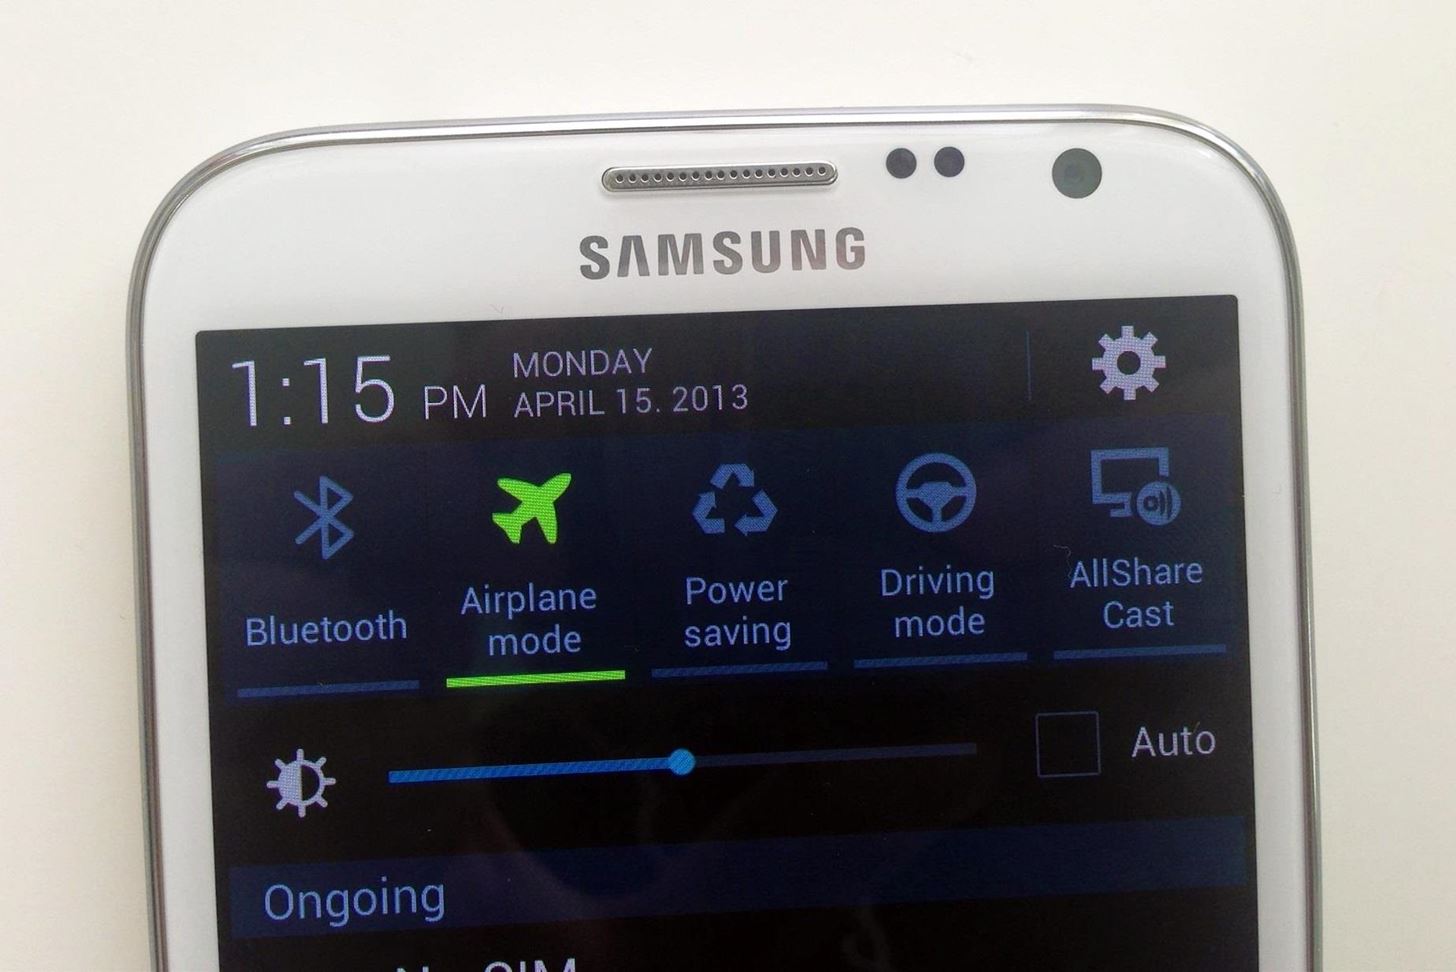 How to Speed Up Charging Times on Your Samsung Galaxy Note 2 or Other Android Device